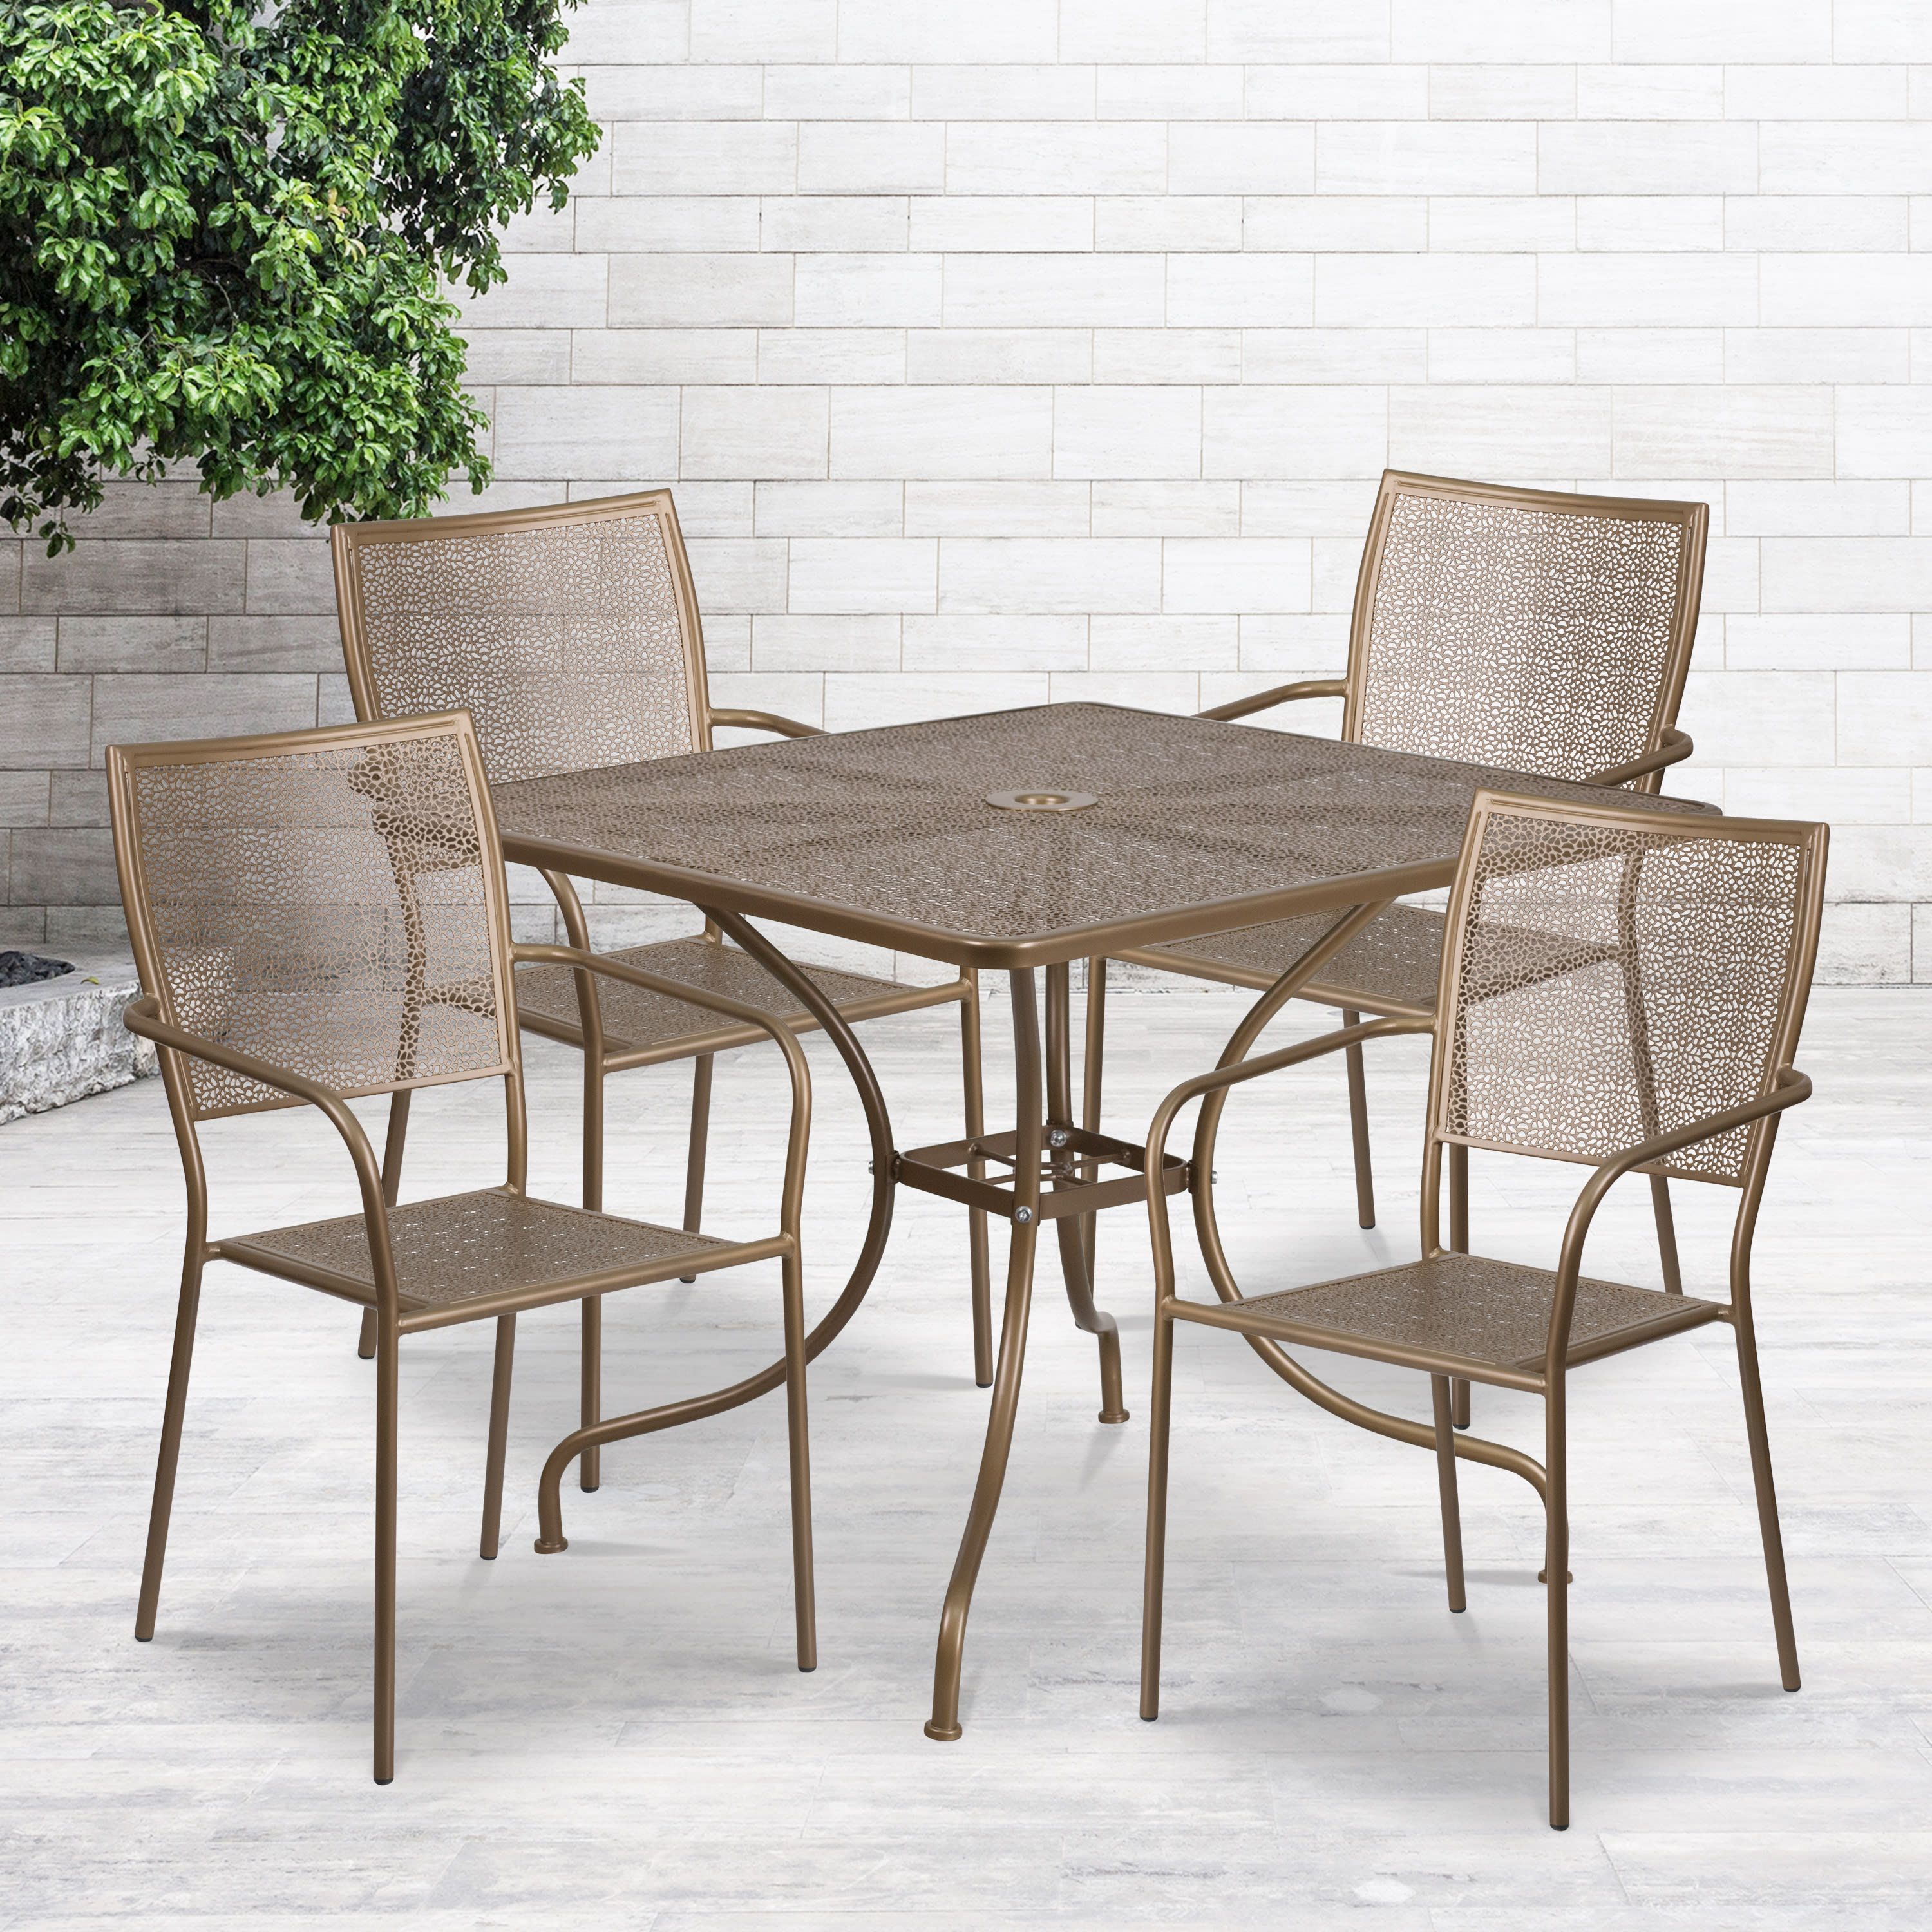 Flash Furniture Commercial Grade 35.5" Square Gold Indoor-Outdoor Steel Patio Table Set with 4 Square Back Chairs - image 1 of 5